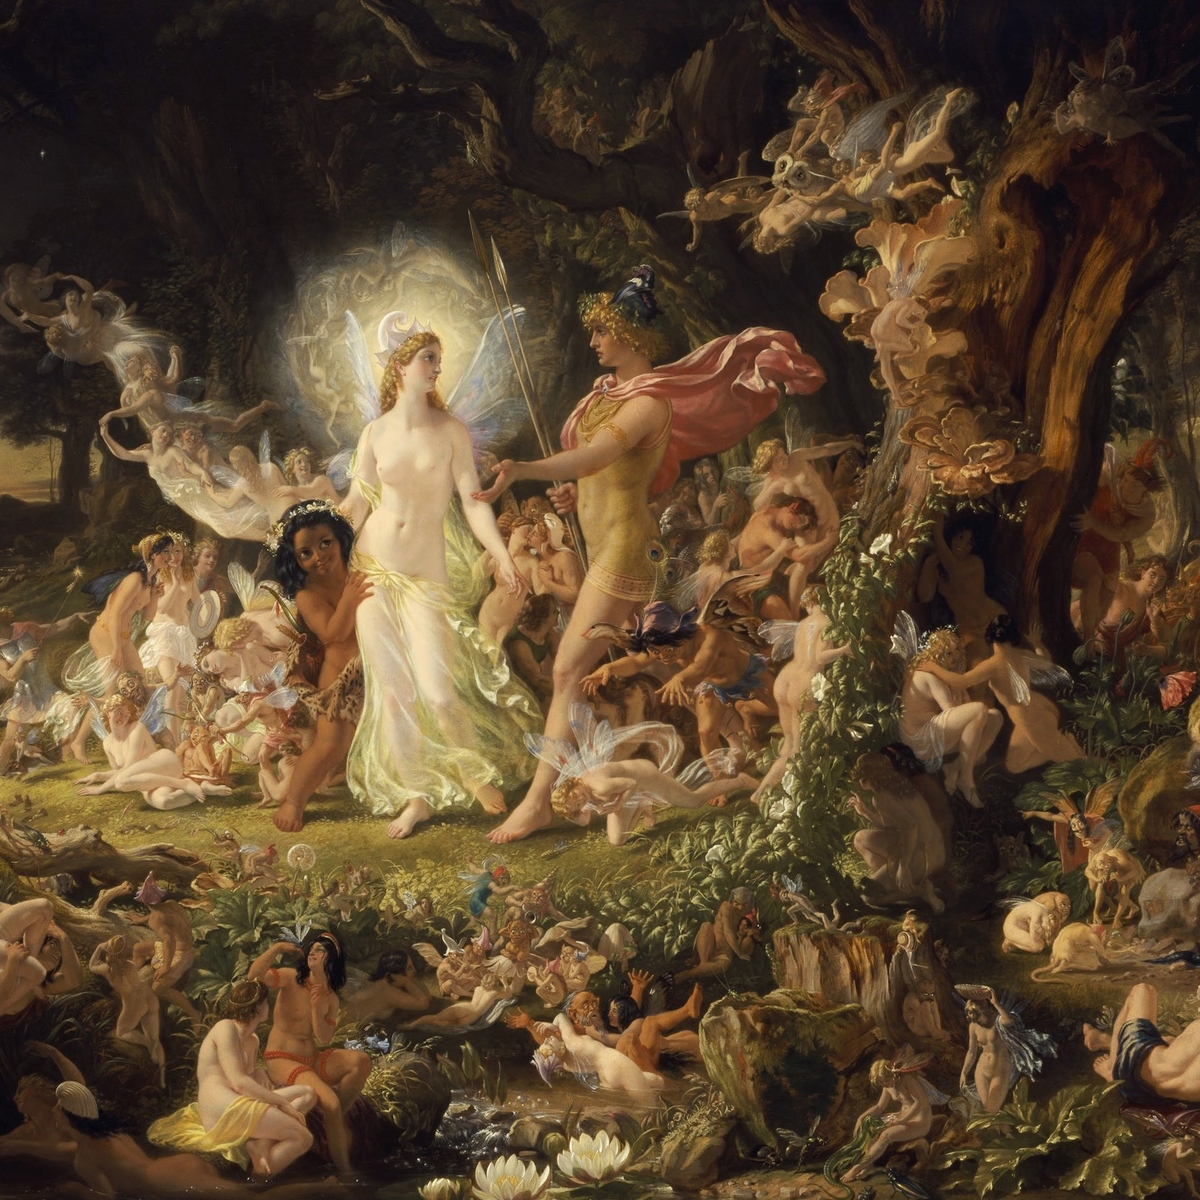 Why won t titania give up the changeling to oberon The Role Of Deception In Love As Portrayed In Shakespeare S A Midsummer Night S Dream And Twelfth Night Inquiries Journal